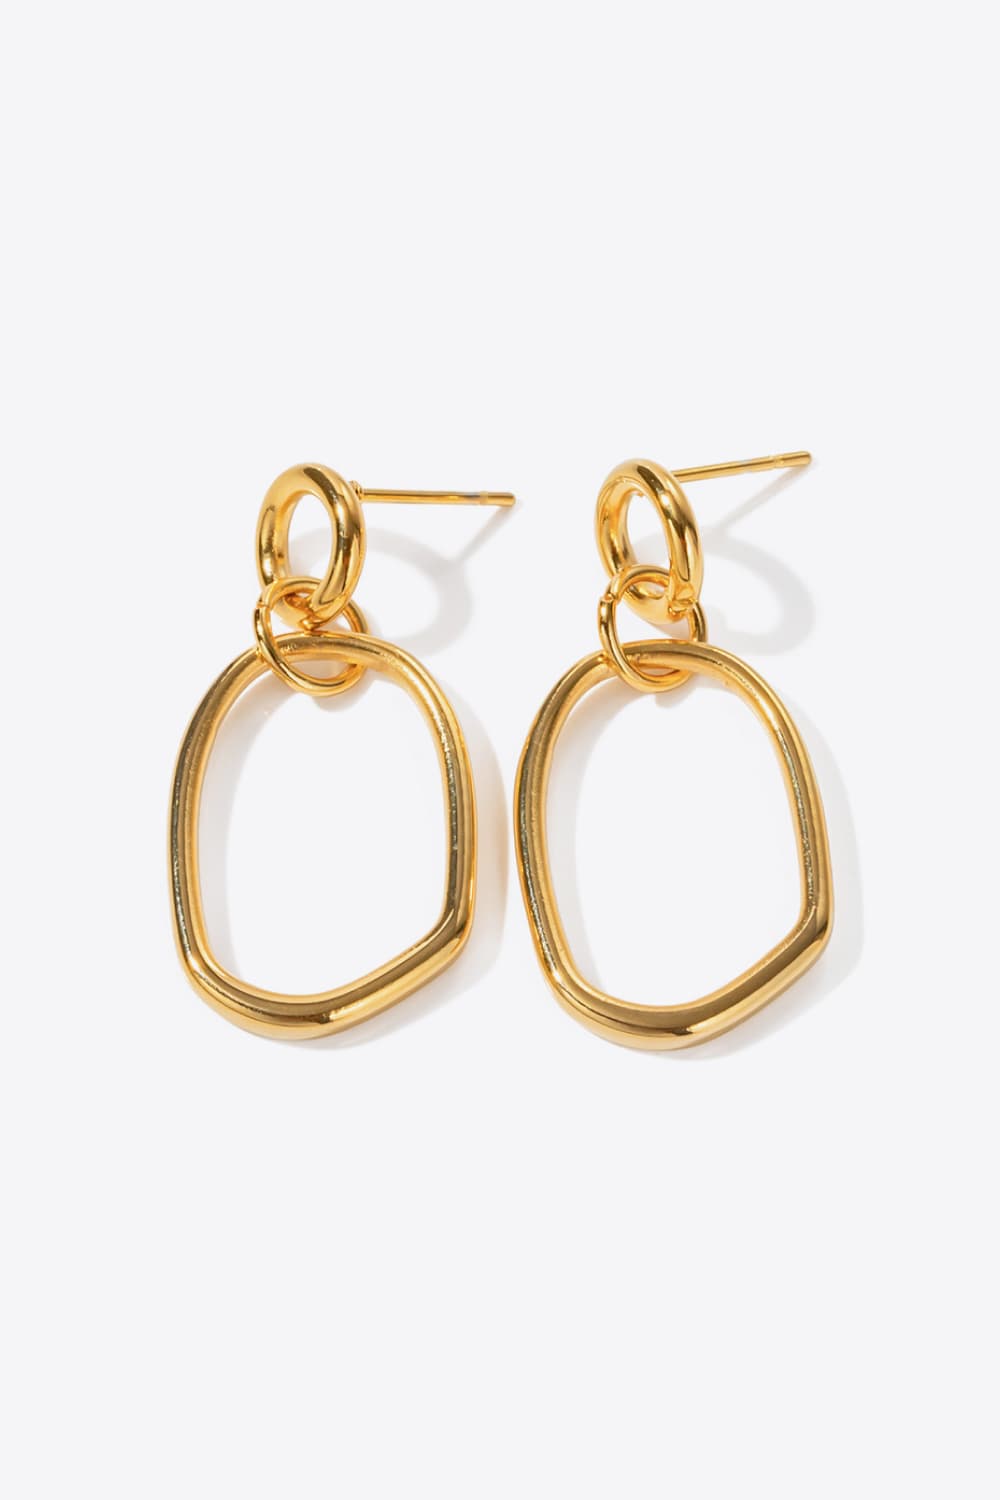 18K Gold-Plated Dangle Earrings - Earrings - Wild Willows Boutique - Massapequa, NY, affordable and fashionable clothing for women of all ages. Bottoms, tops, dresses, intimates, outerwear, sweater, shoes, accessories, jewelry, active wear, and more // Wild Willow Boutique.